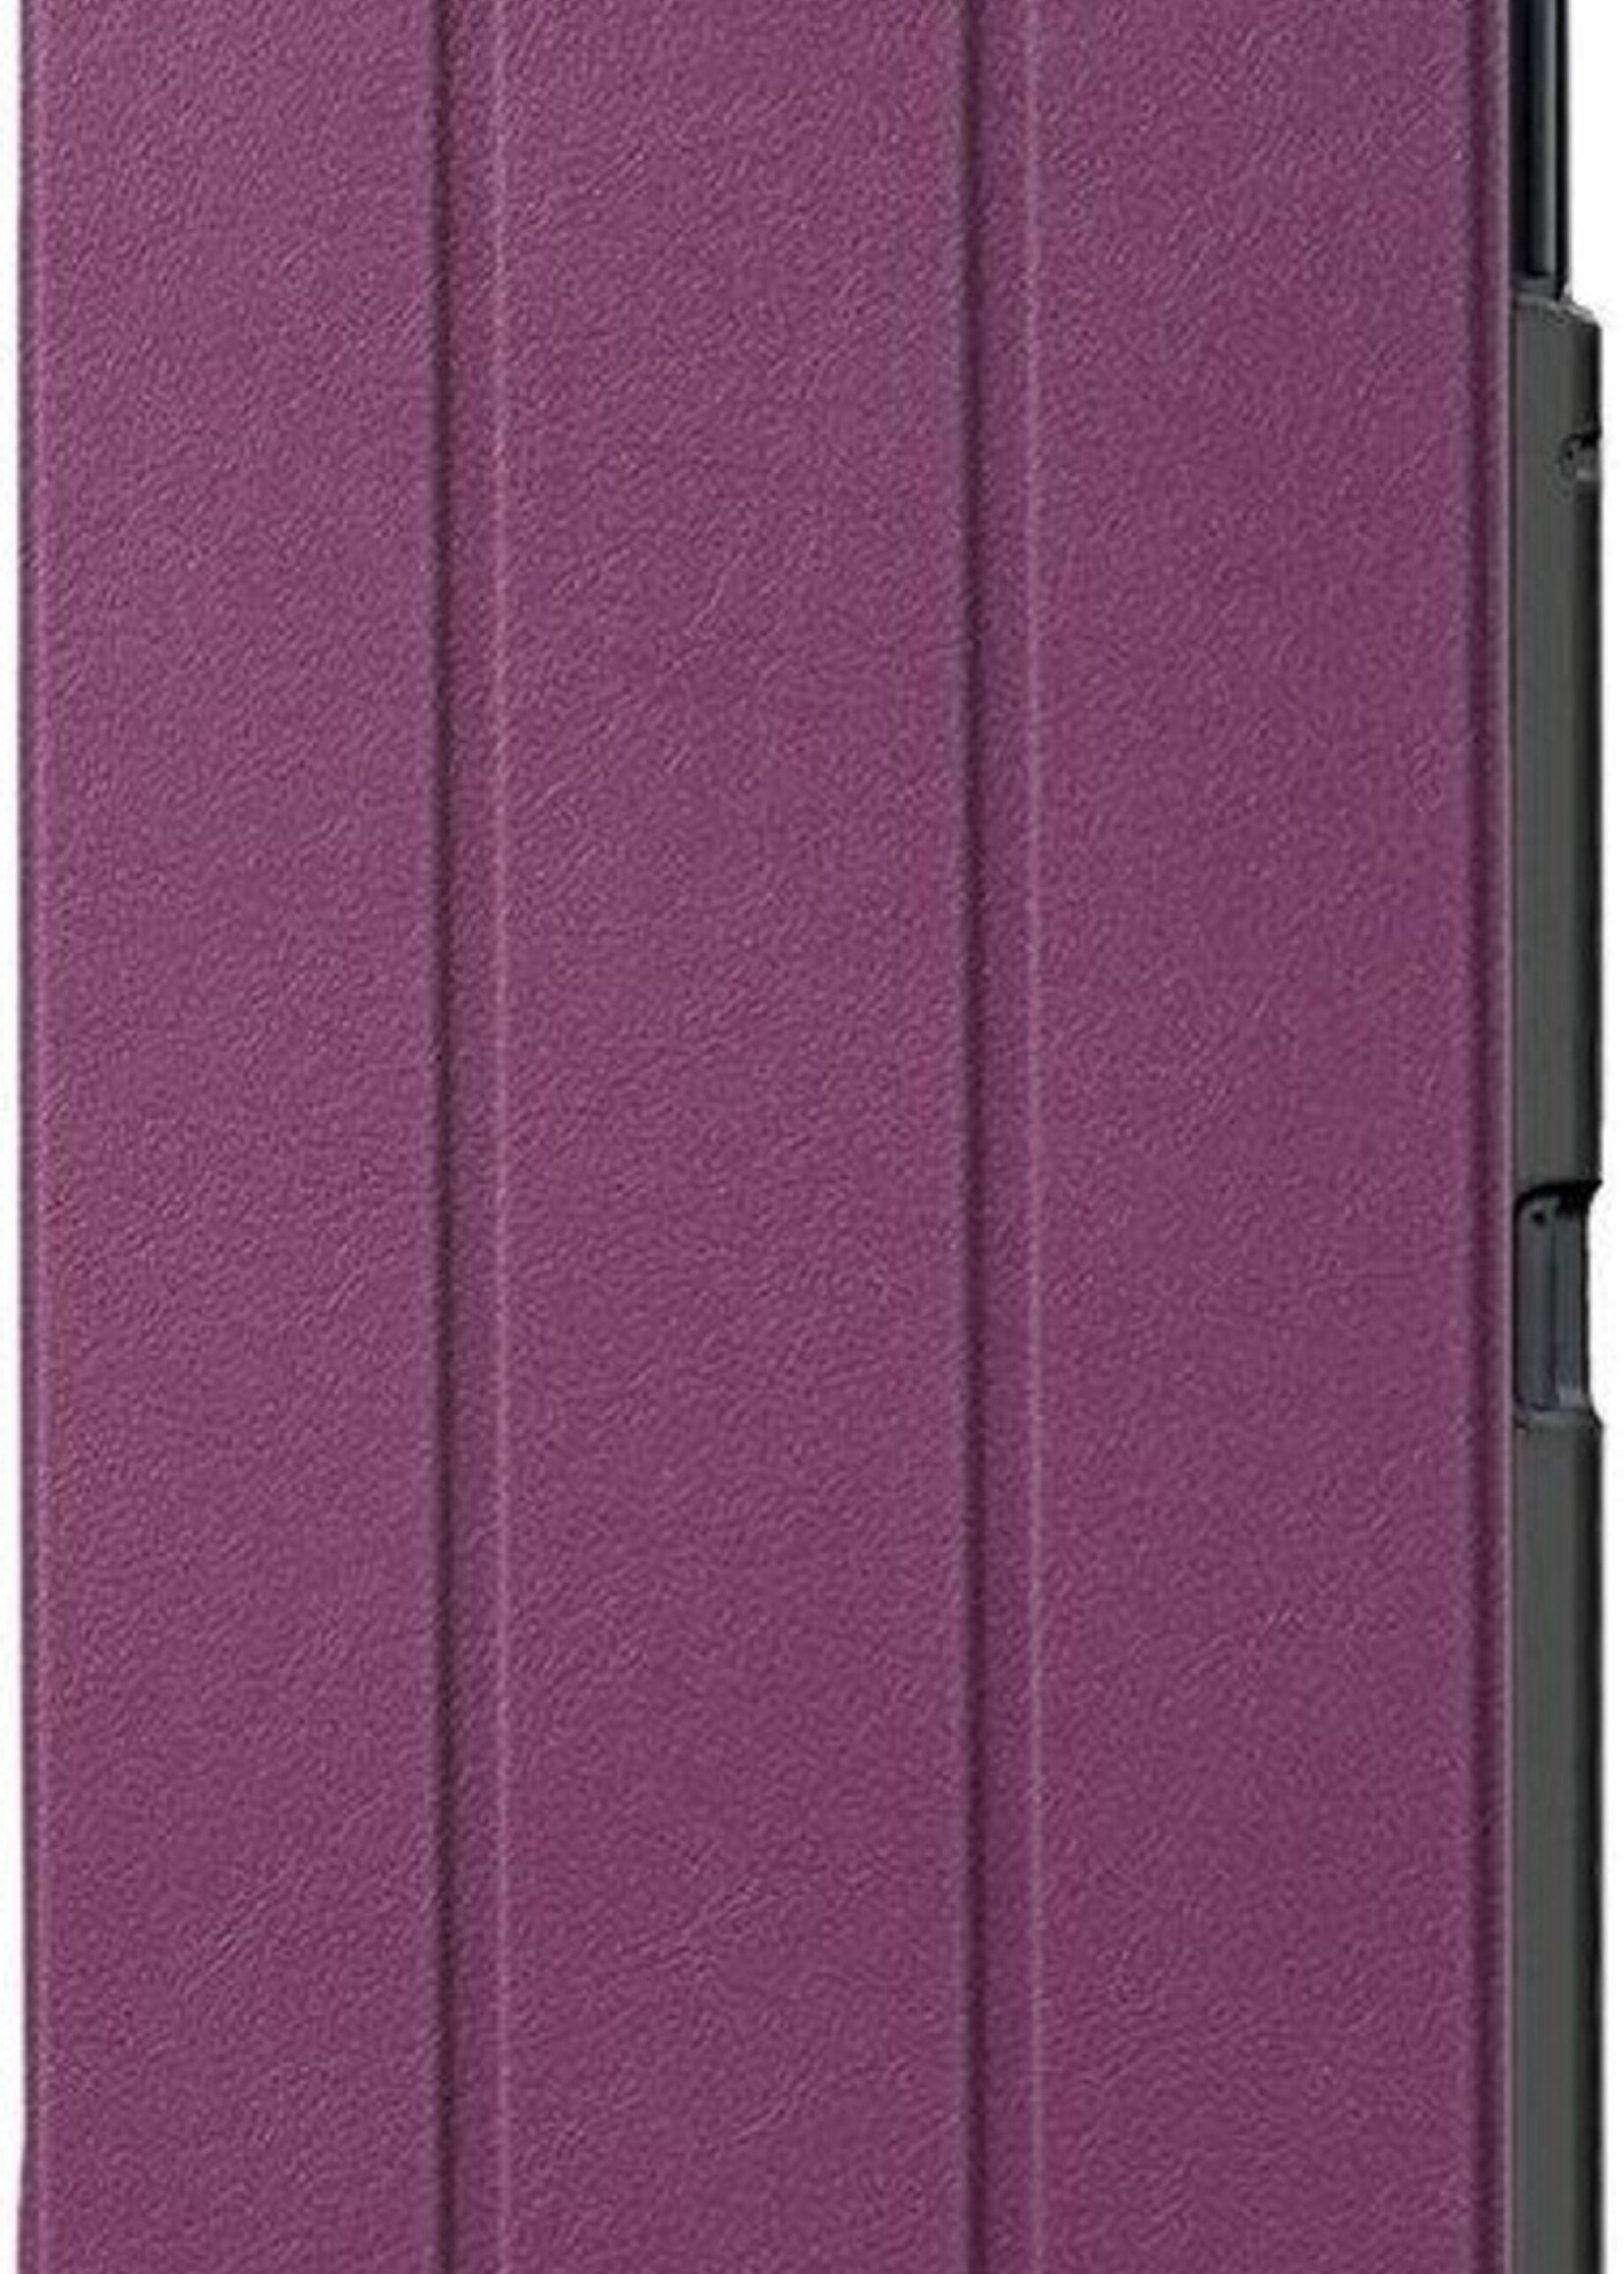 BTH Hoes Geschikt voor Samsung Galaxy Tab A 10.5 2018 Hoes Book Case Hoesje Trifold Cover - Hoesje Geschikt voor Samsung Tab A 10.5 2018 Hoesje Bookcase - Paars